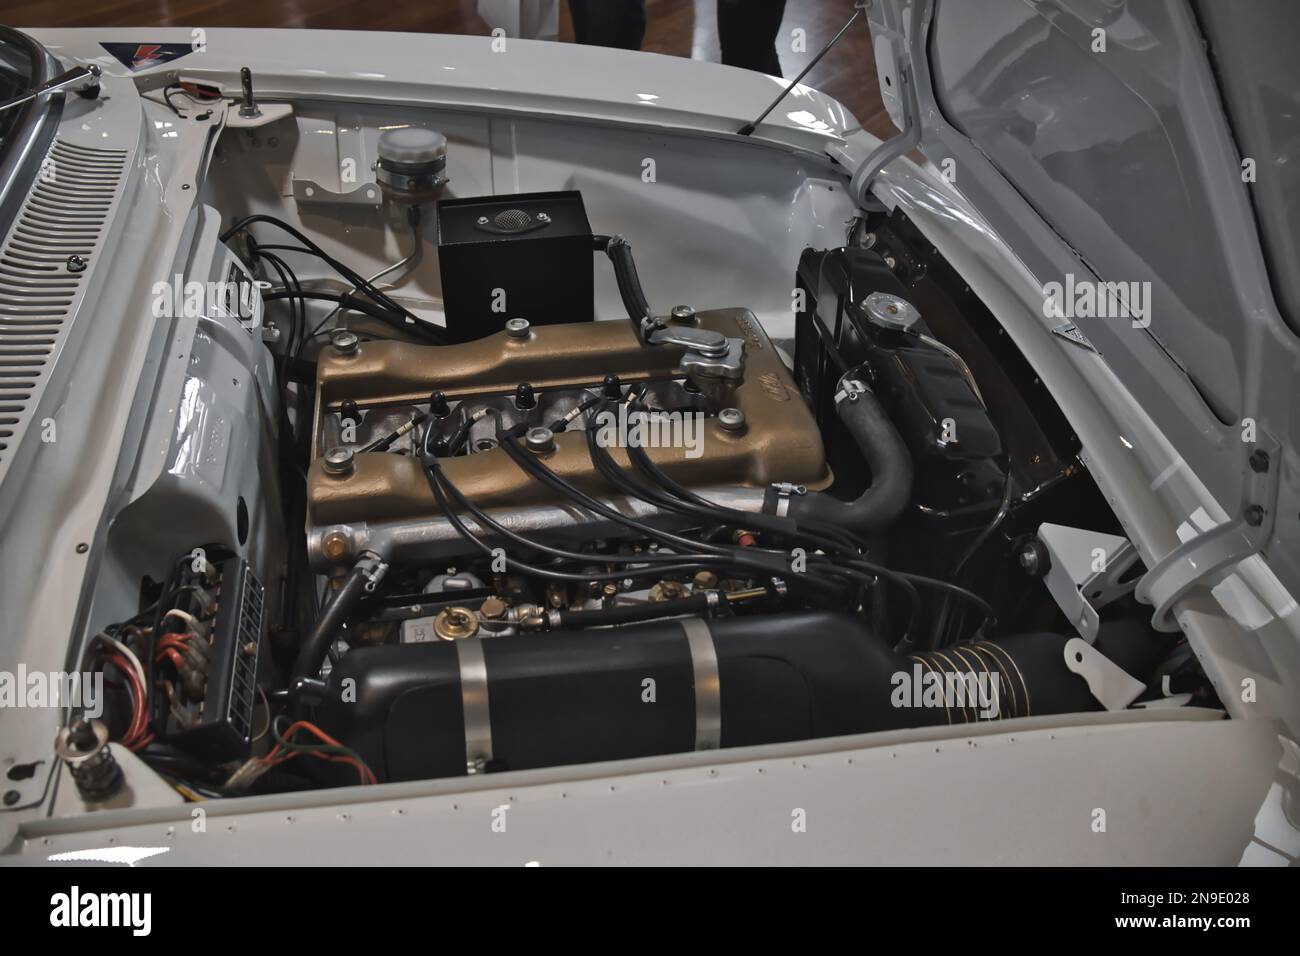 A close-up of the engine of a white classic Alfa Romeo rally car Stock Photo